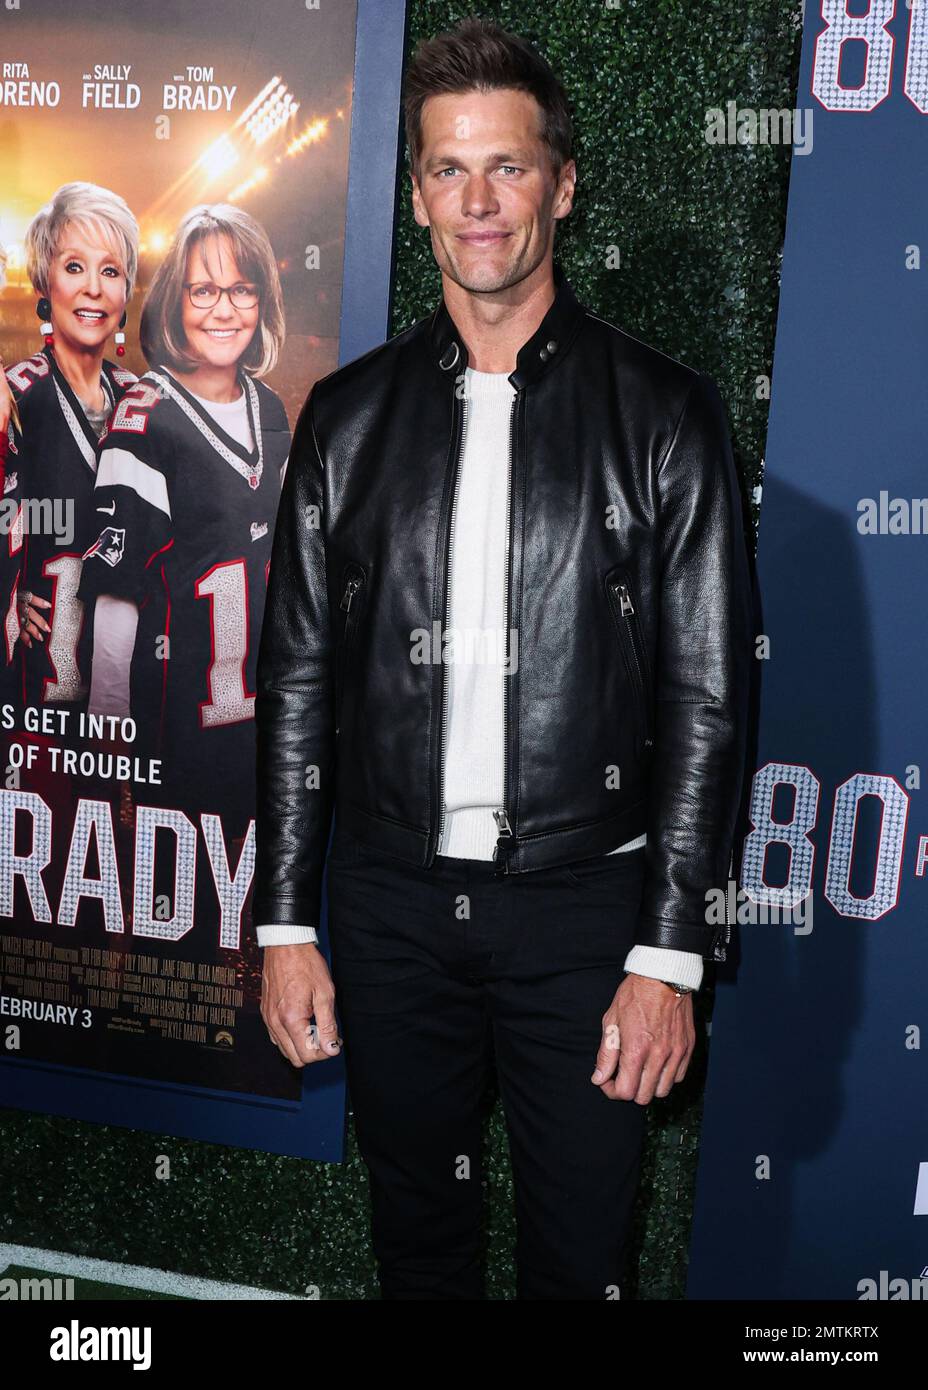 WESTWOOD, LOS ANGELES, CALIFORNIA, USA - JANUARY 31: American football quarterback for the Tampa Bay Buccaneers of the National Football League Tom Brady arrives at the Los Angeles Premiere Screening Of Paramount Pictures' '80 For Brady' held at the Regency Village Theatre on January 31, 2023 in Westwood, Los Angeles, California, United States. (Photo by Xavier Collin/Image Press Agency) Stock Photo